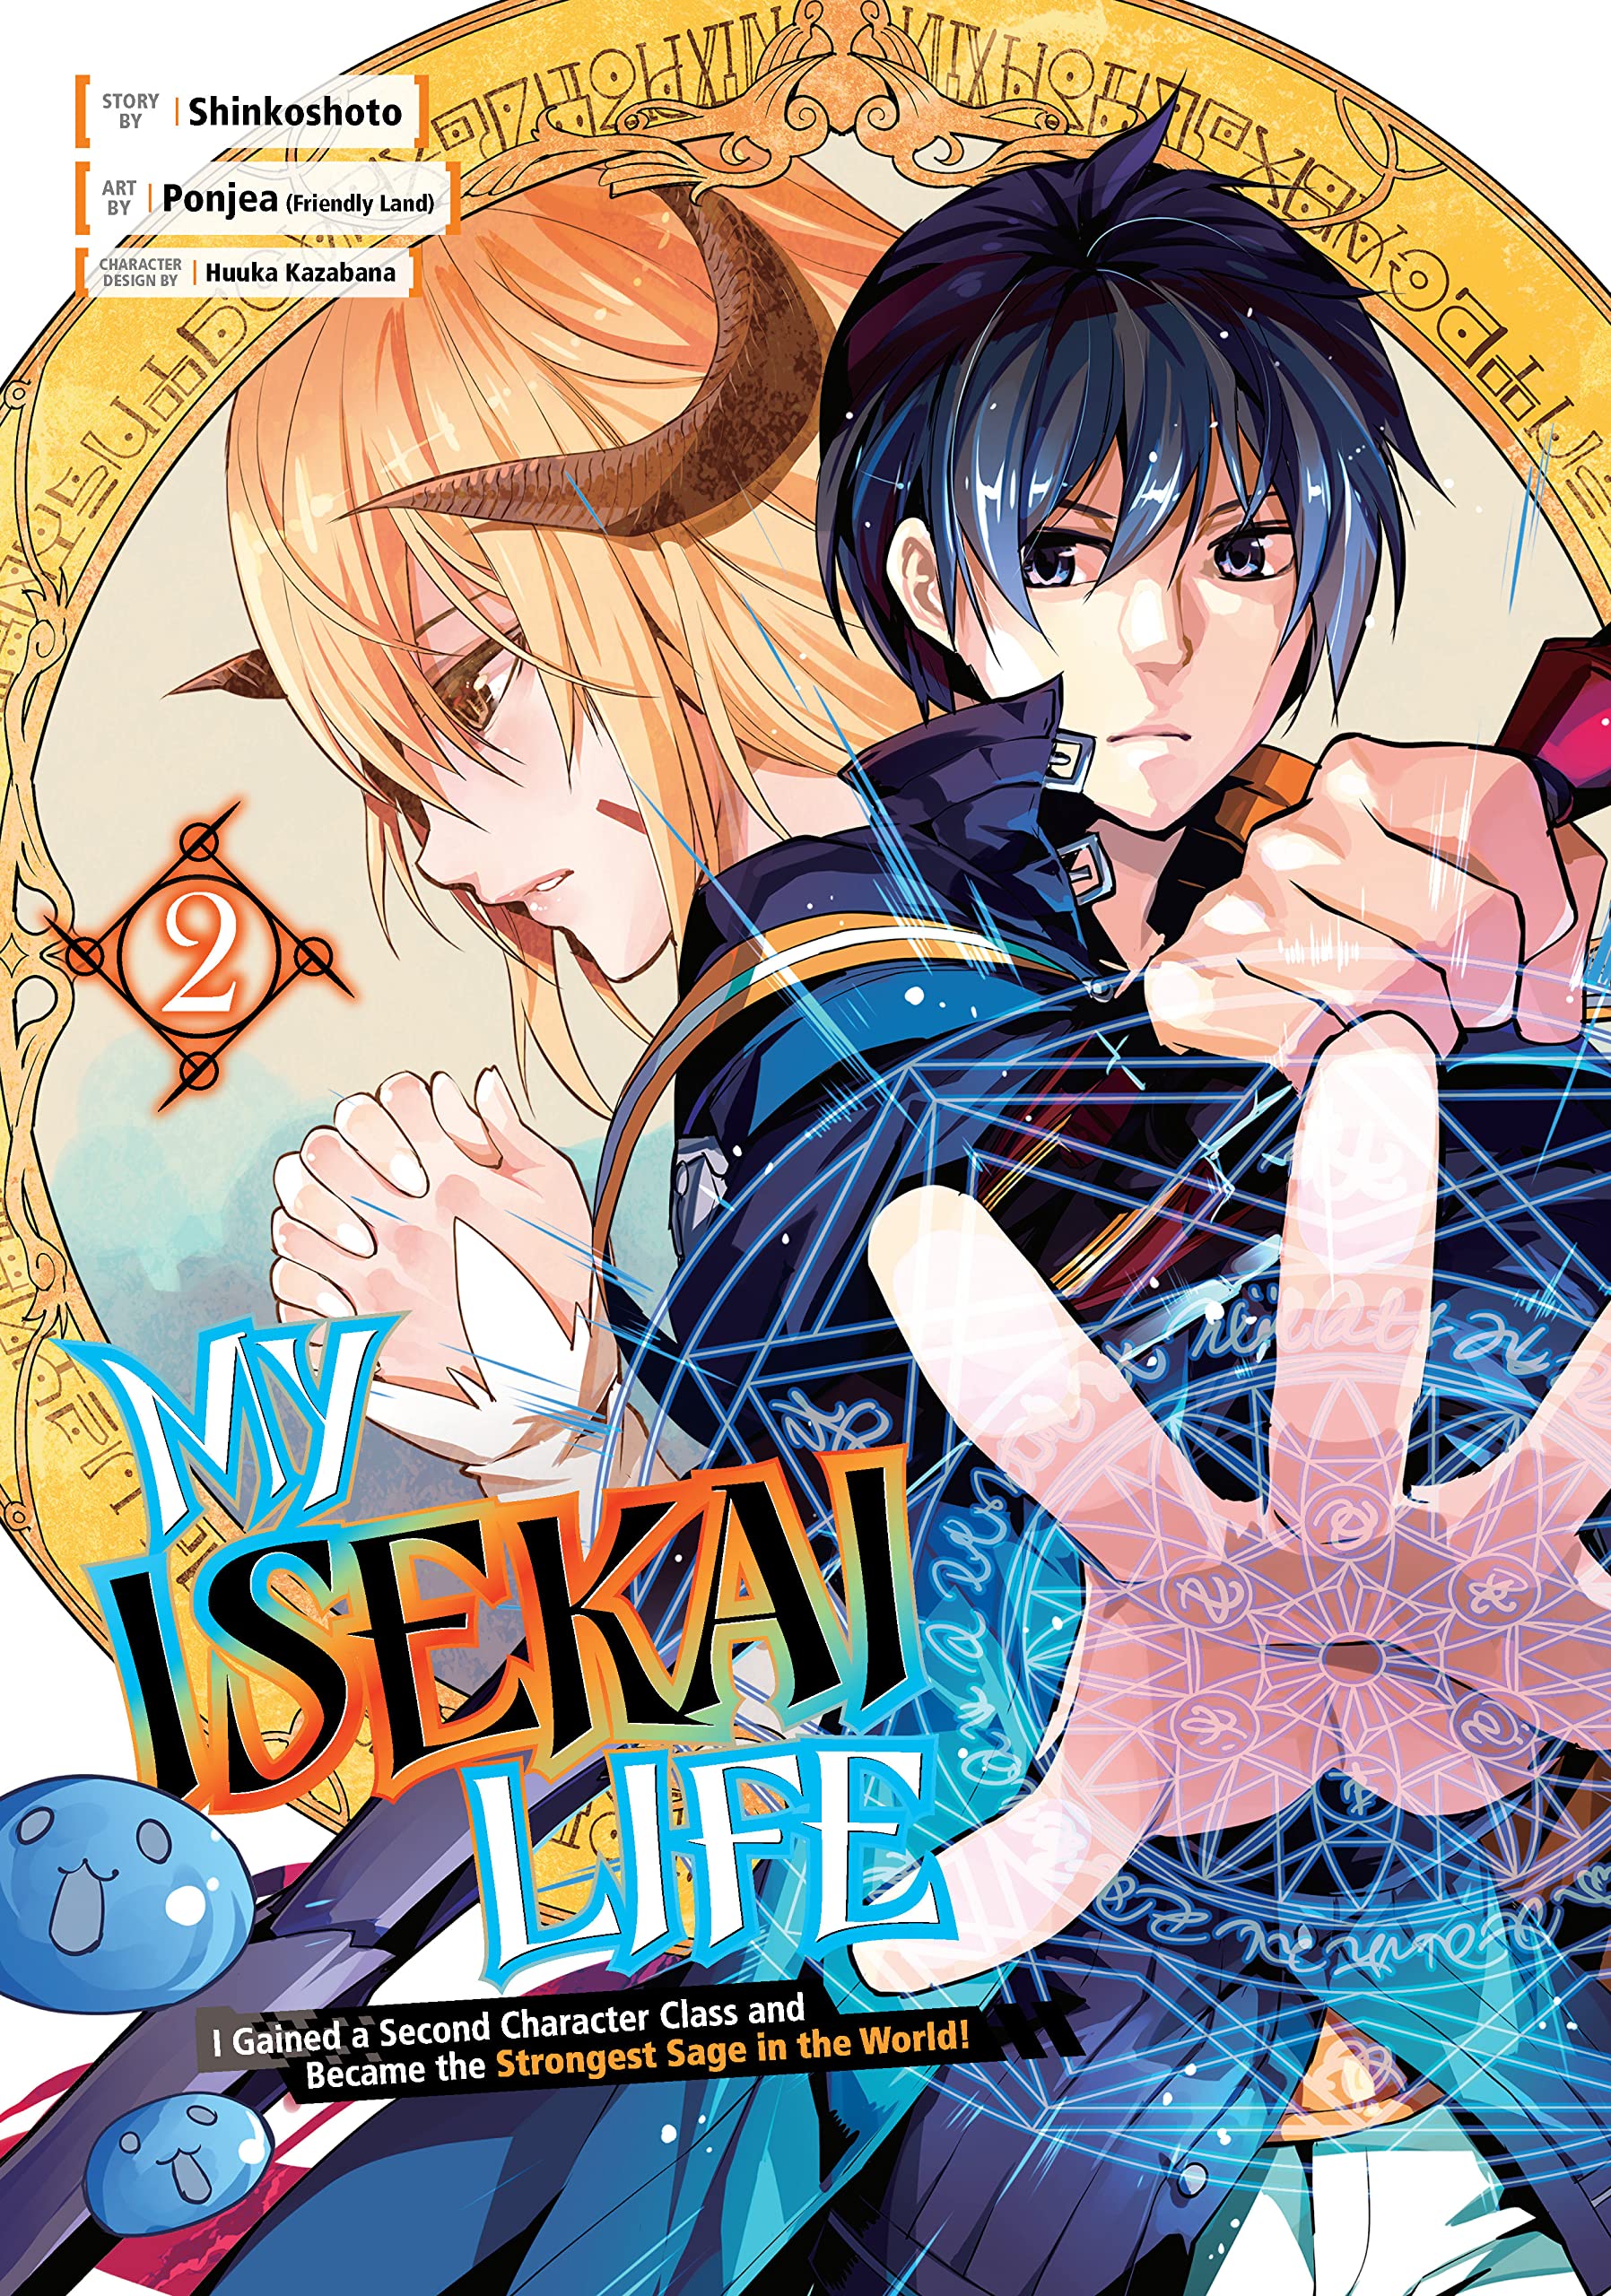 My Isekai Life: I Gained a Second Character Class and Became the Strongest Sage in the World! Vol. 02